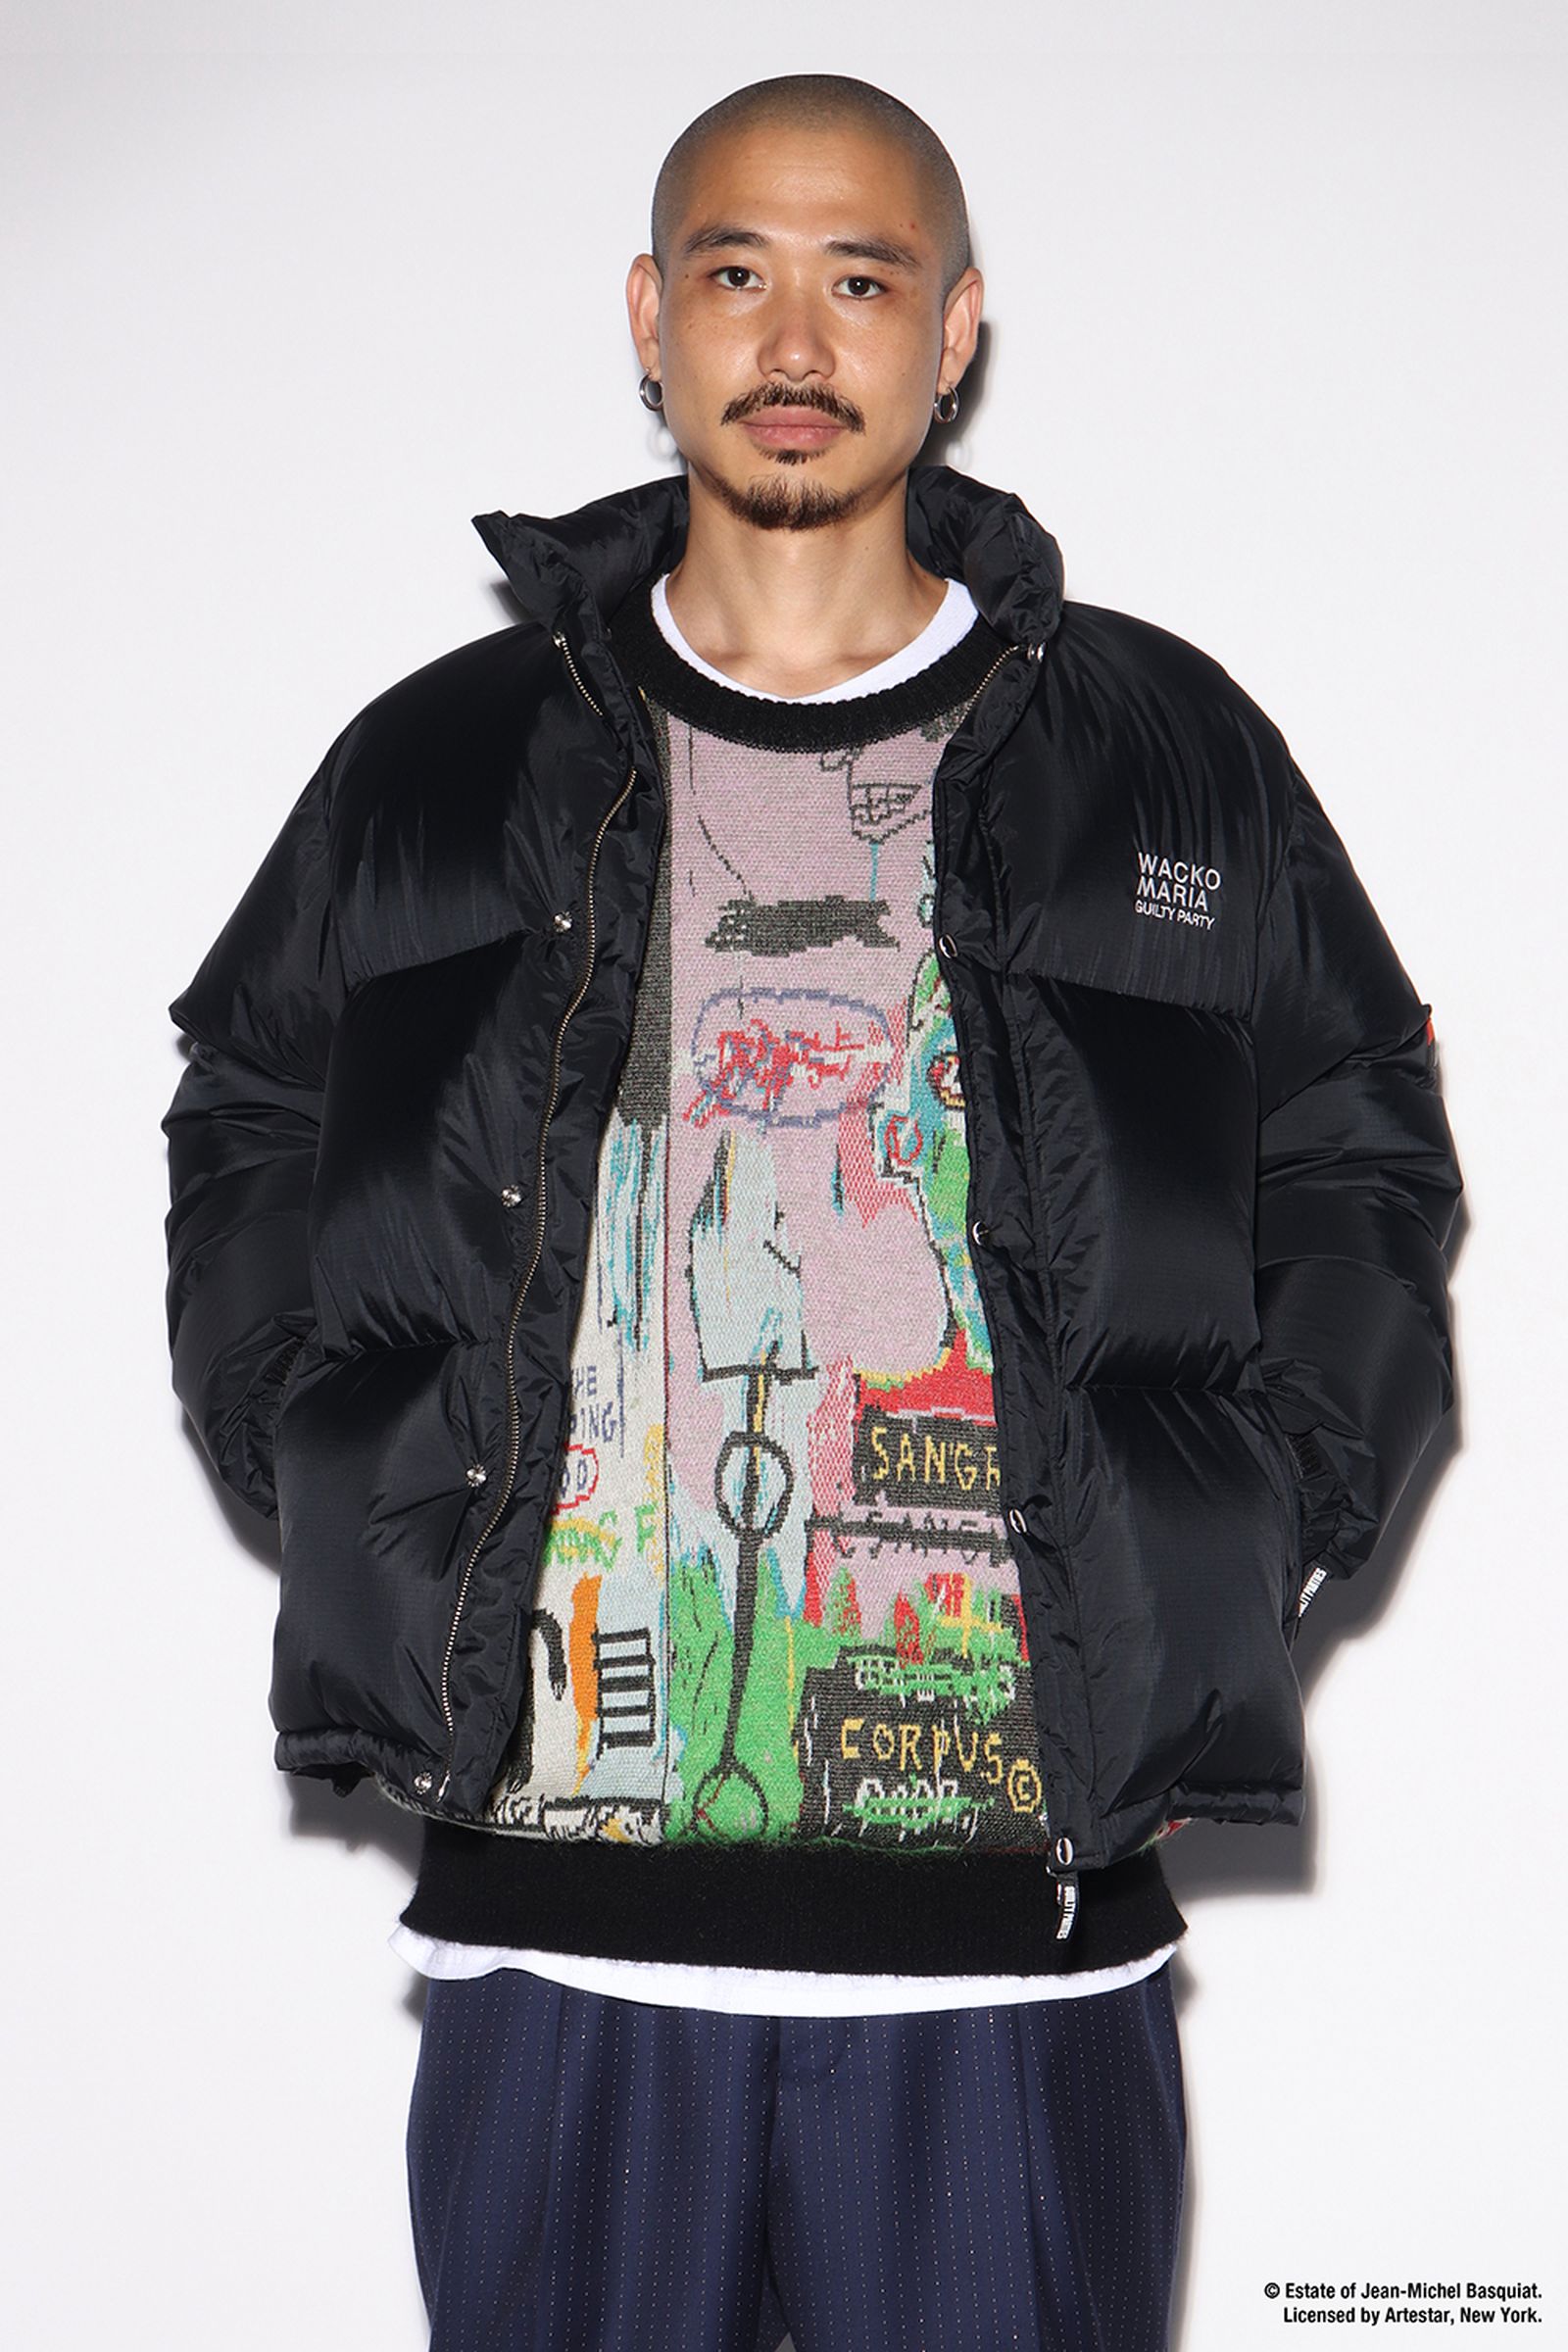 WACKO MARIA Drops Basquiat, Marley Collabs in FW22 Collection